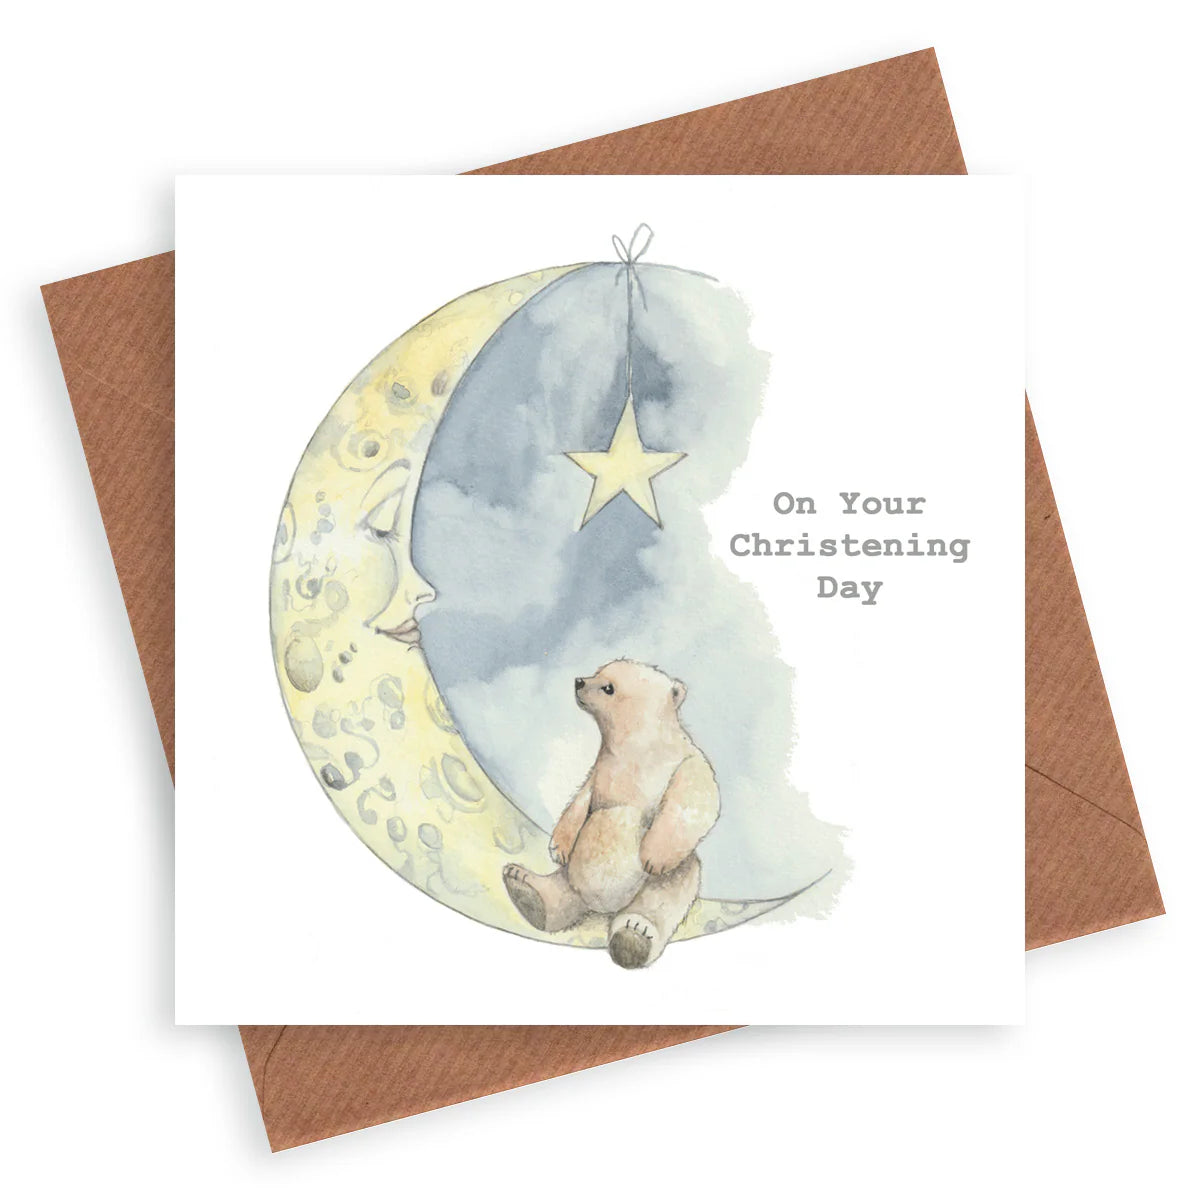 Fabulous Gifts Crumble & Core Moon And Bear Christening Card   by Weirs of Baggot Street